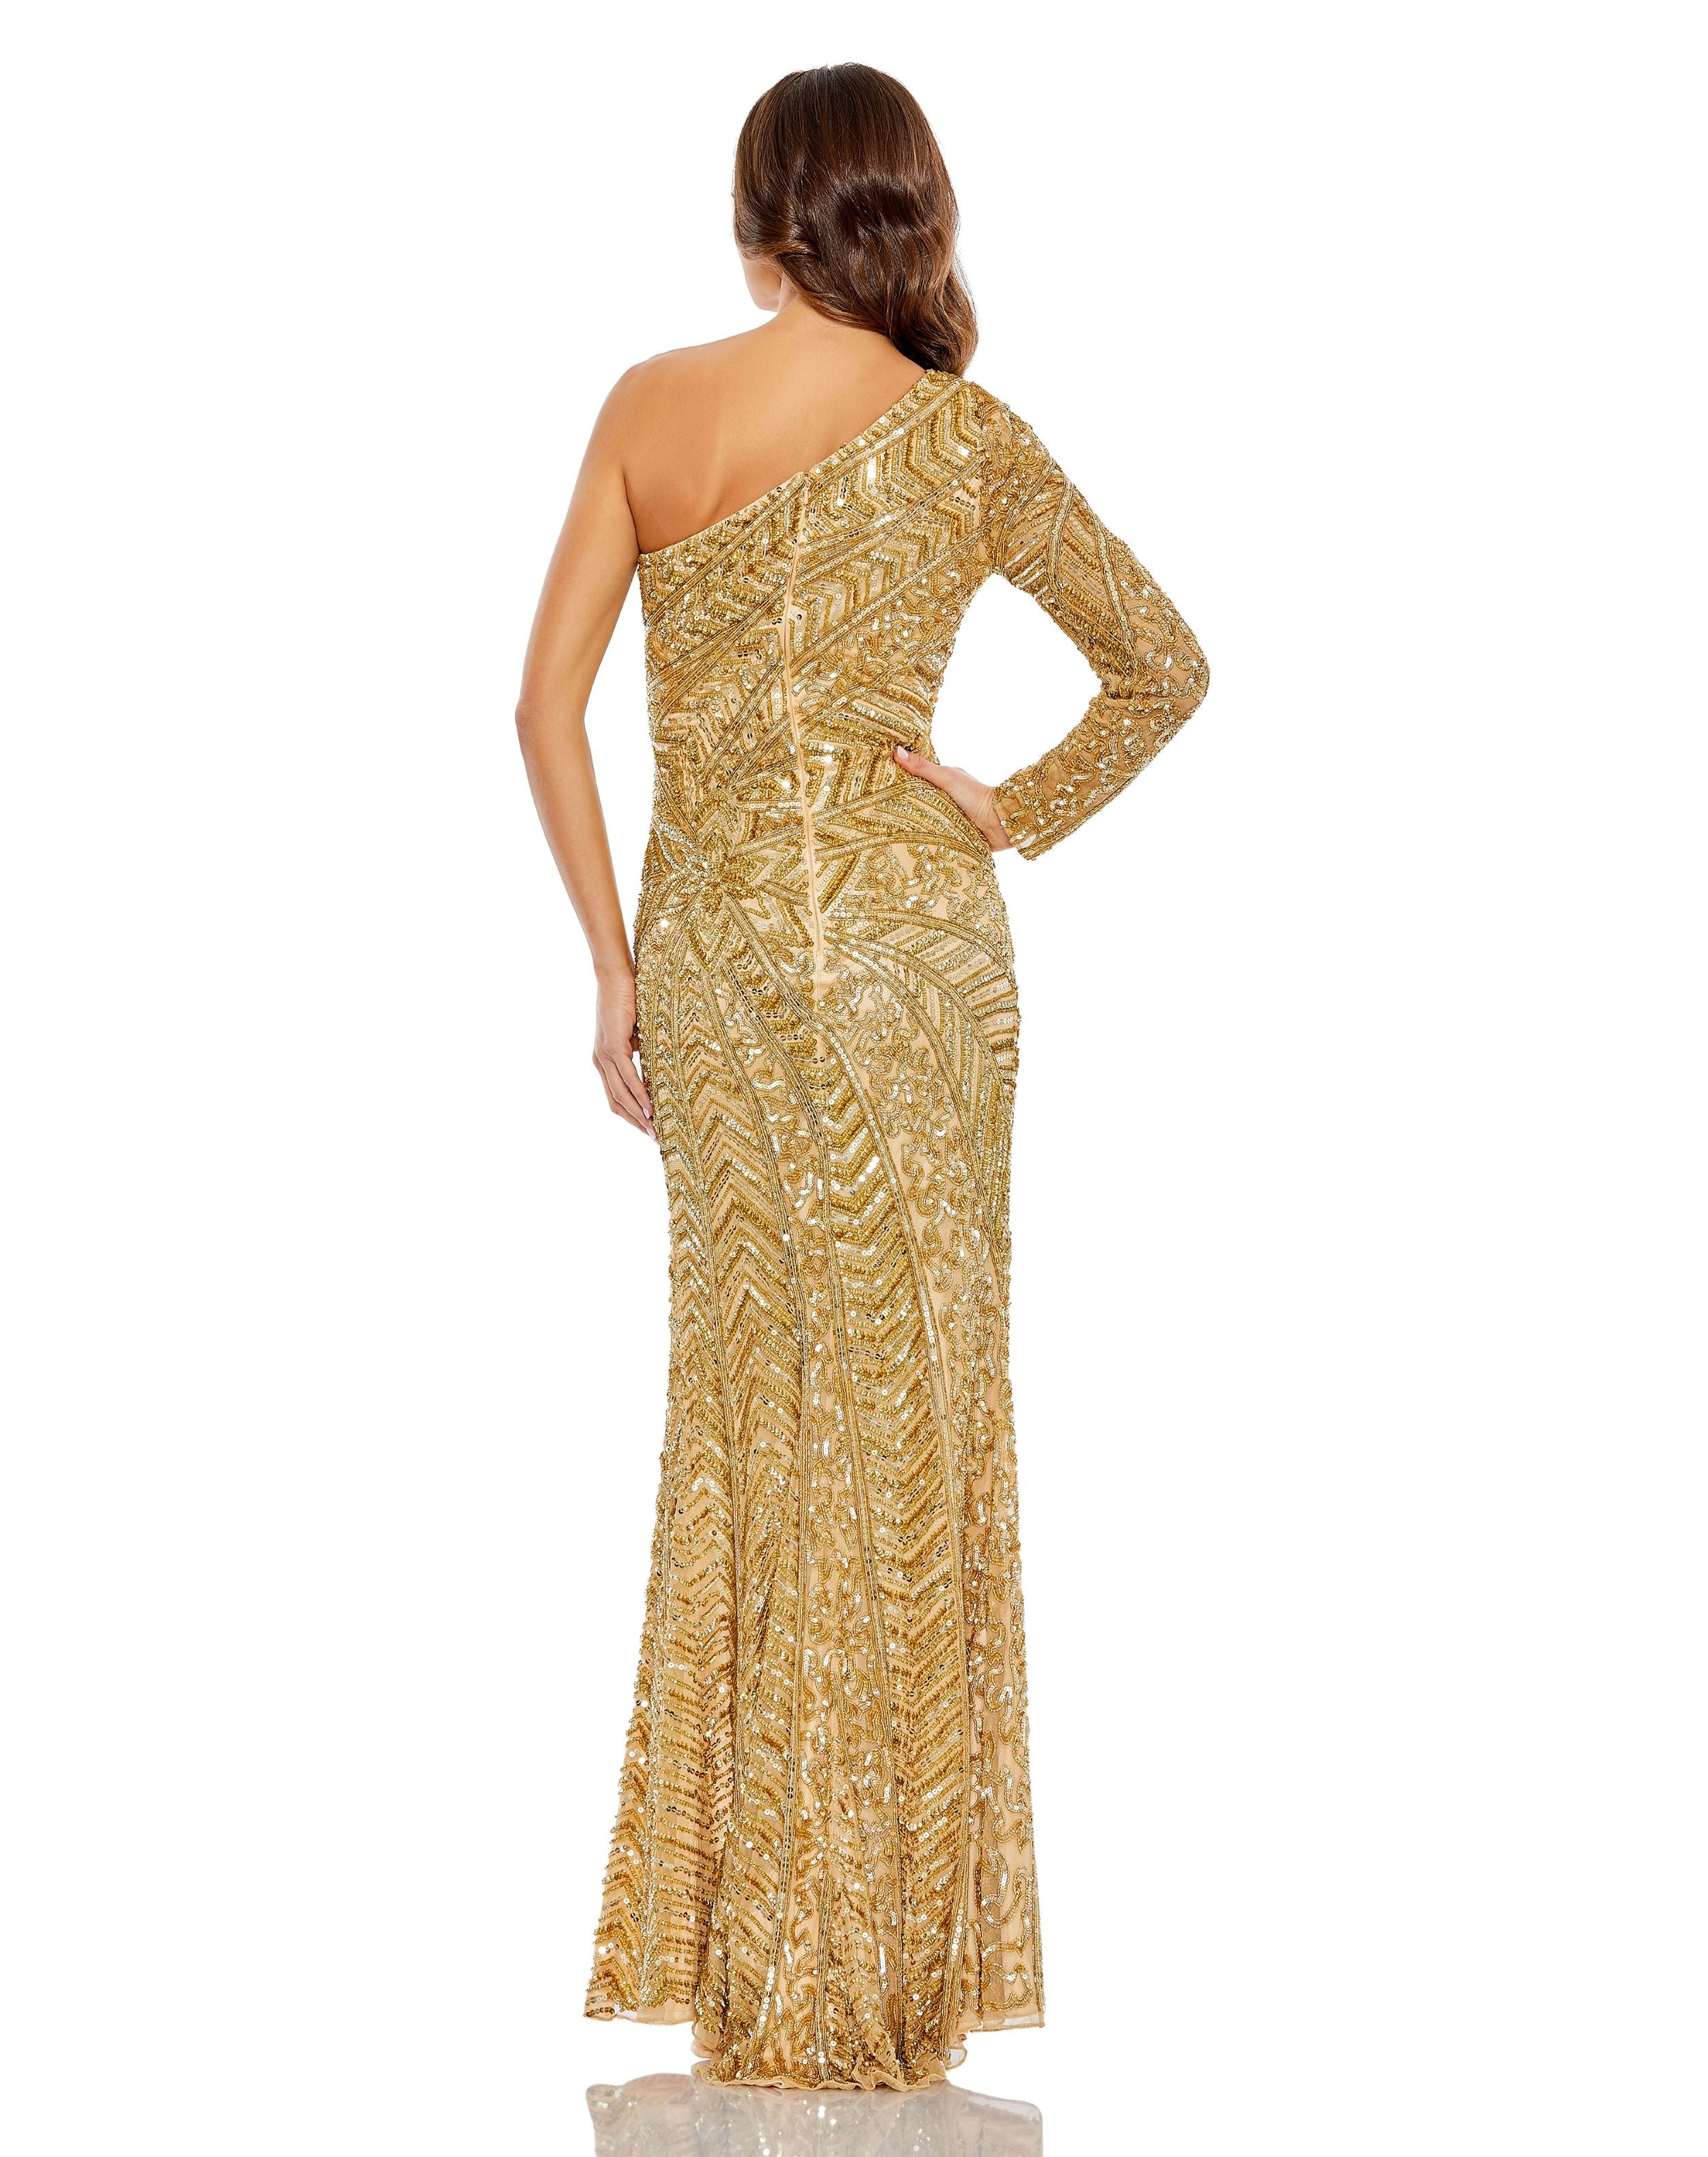 Embellished Illusion One Sleeve Gown